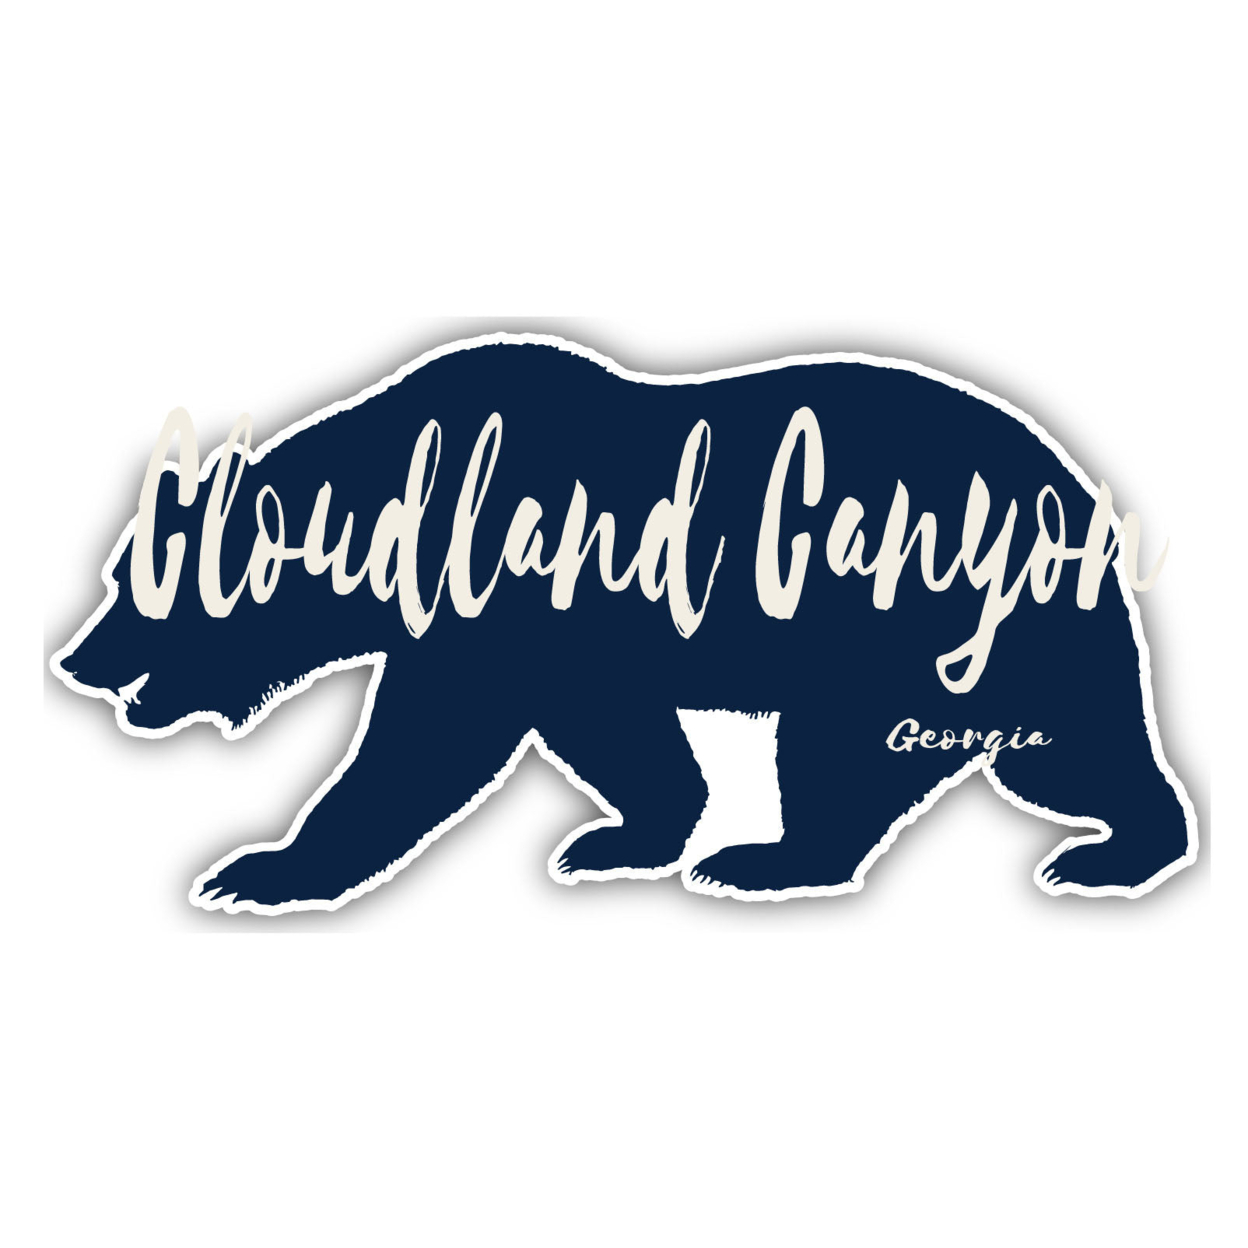 Cloudland Canyon Georgia Souvenir Decorative Stickers (Choose Theme And Size) - 4-Pack, 2-Inch, Camp Life